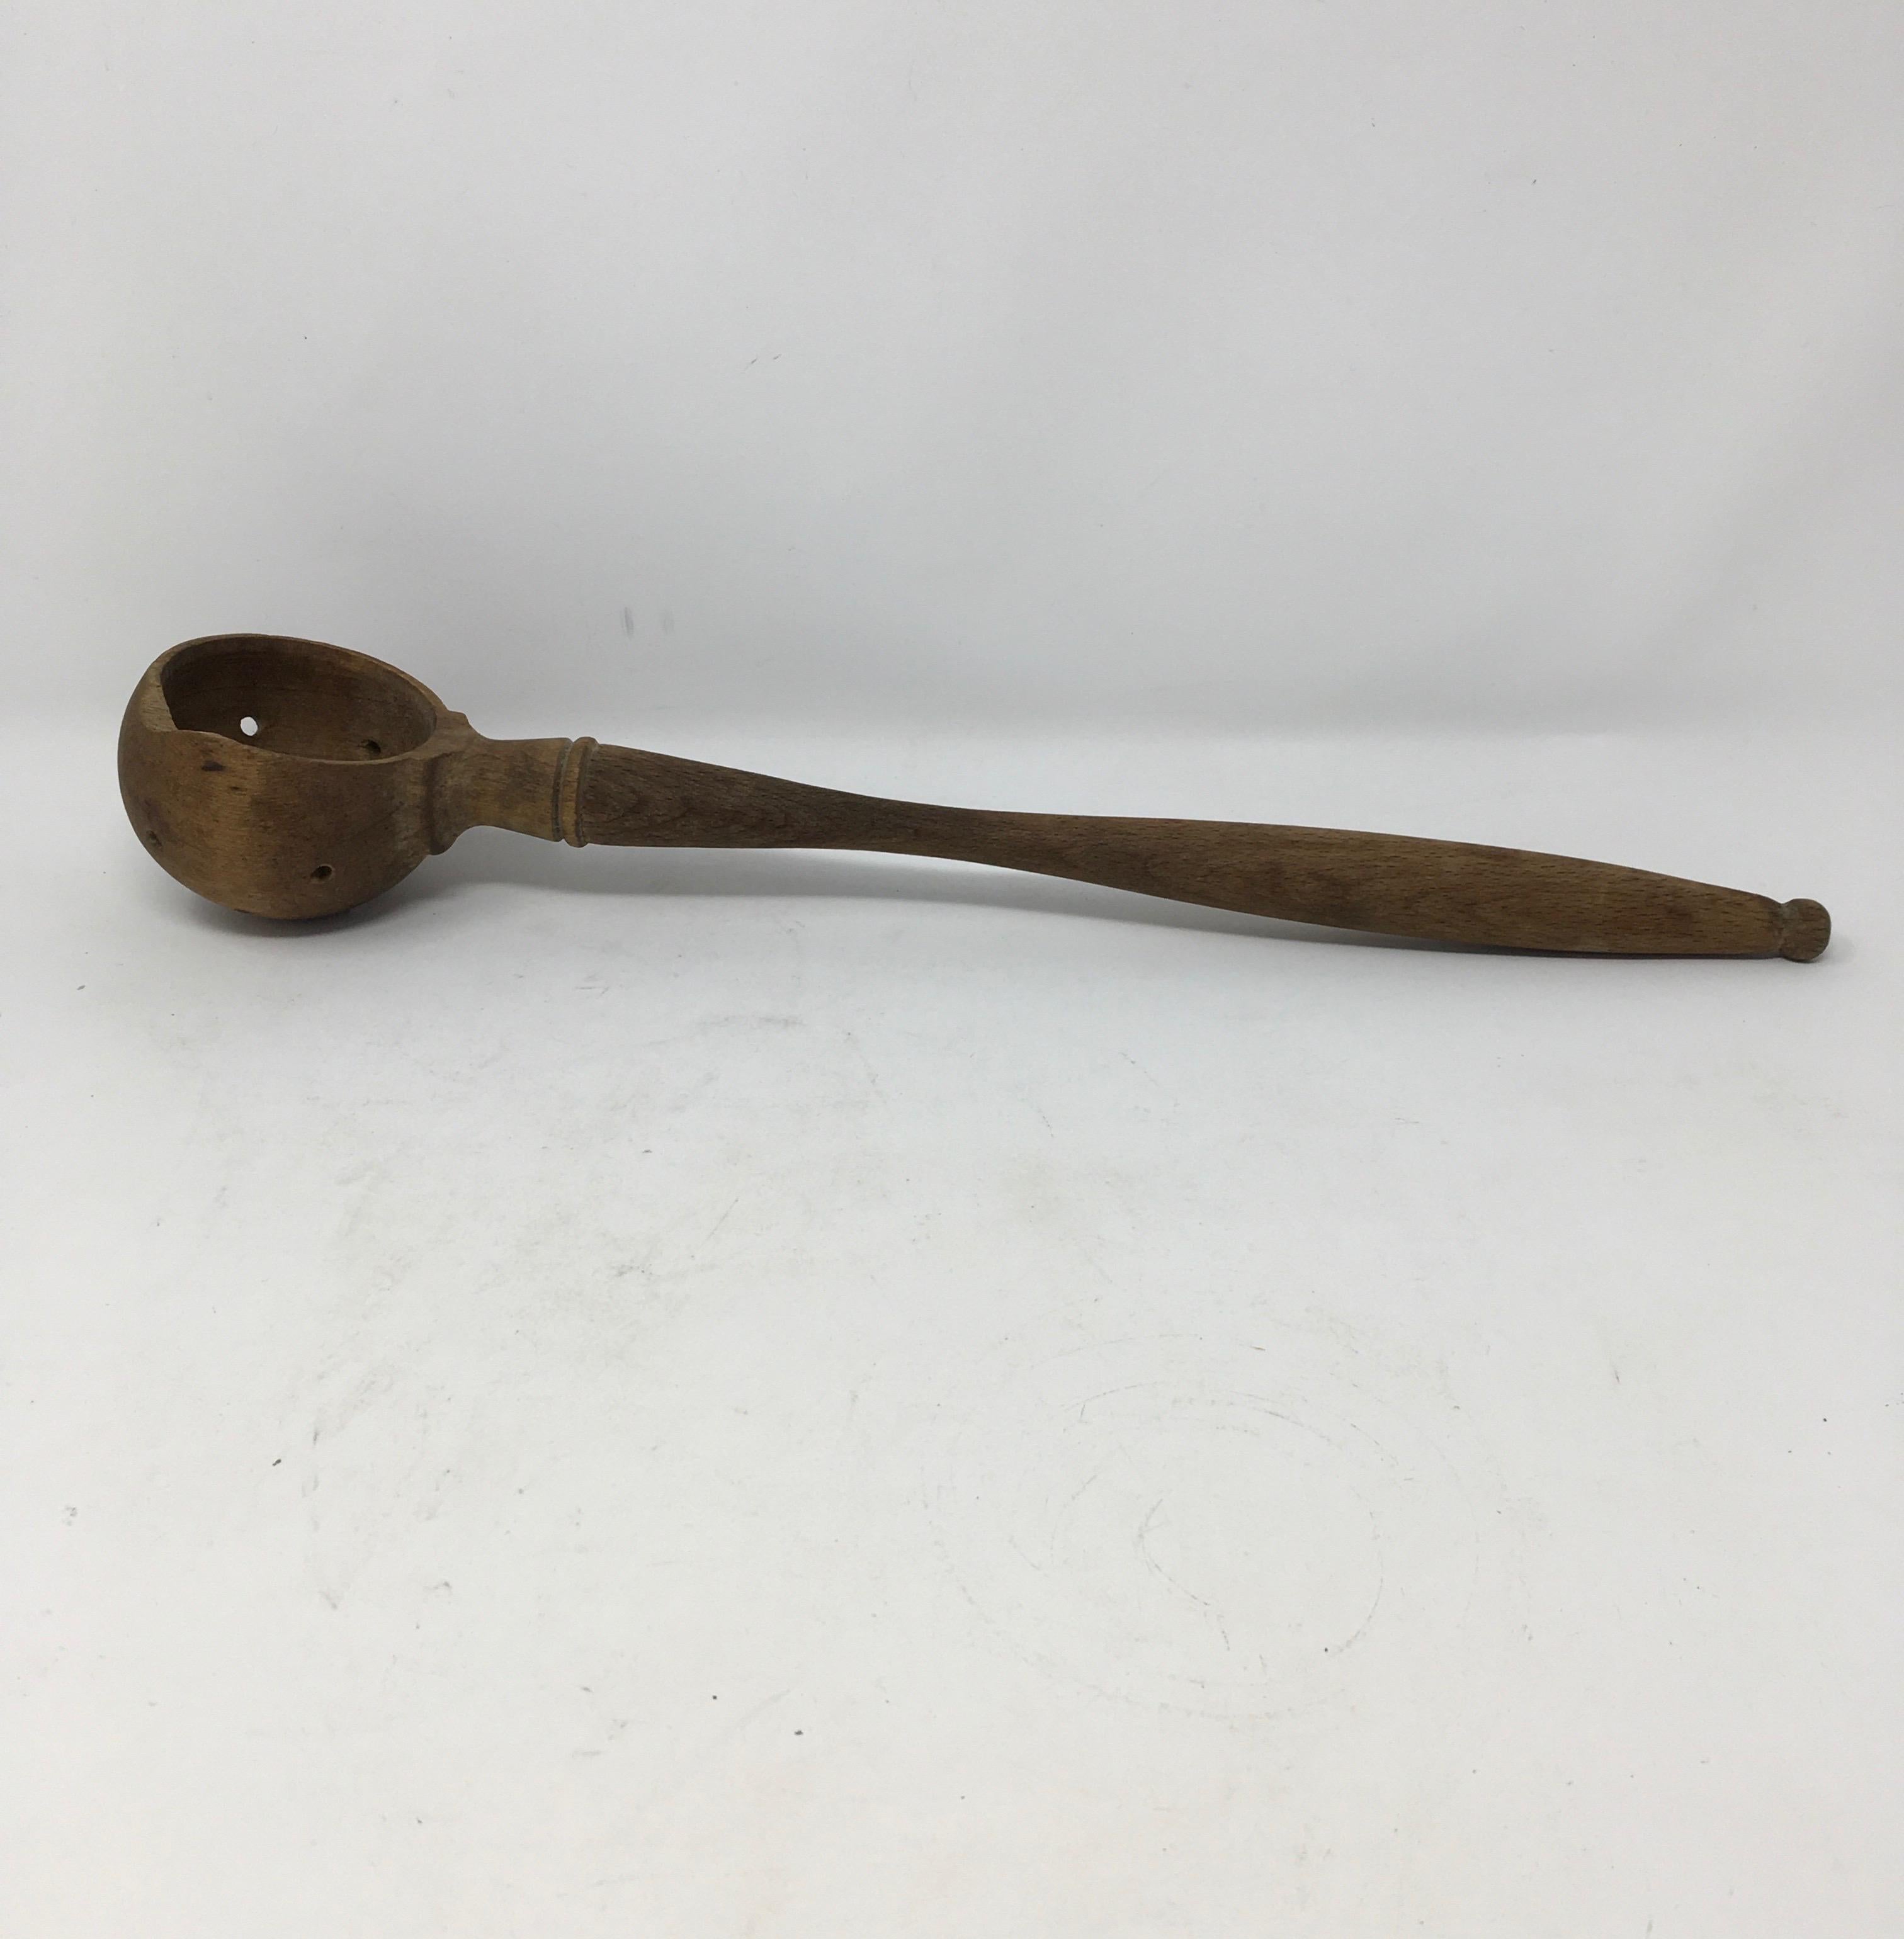 Found in the South of France, this olive spoon was used to scoop olives from large preserving jars. These spoons are a French tool that one would see everywhere from market stalls to well equipped homes throughout the southern region of France.